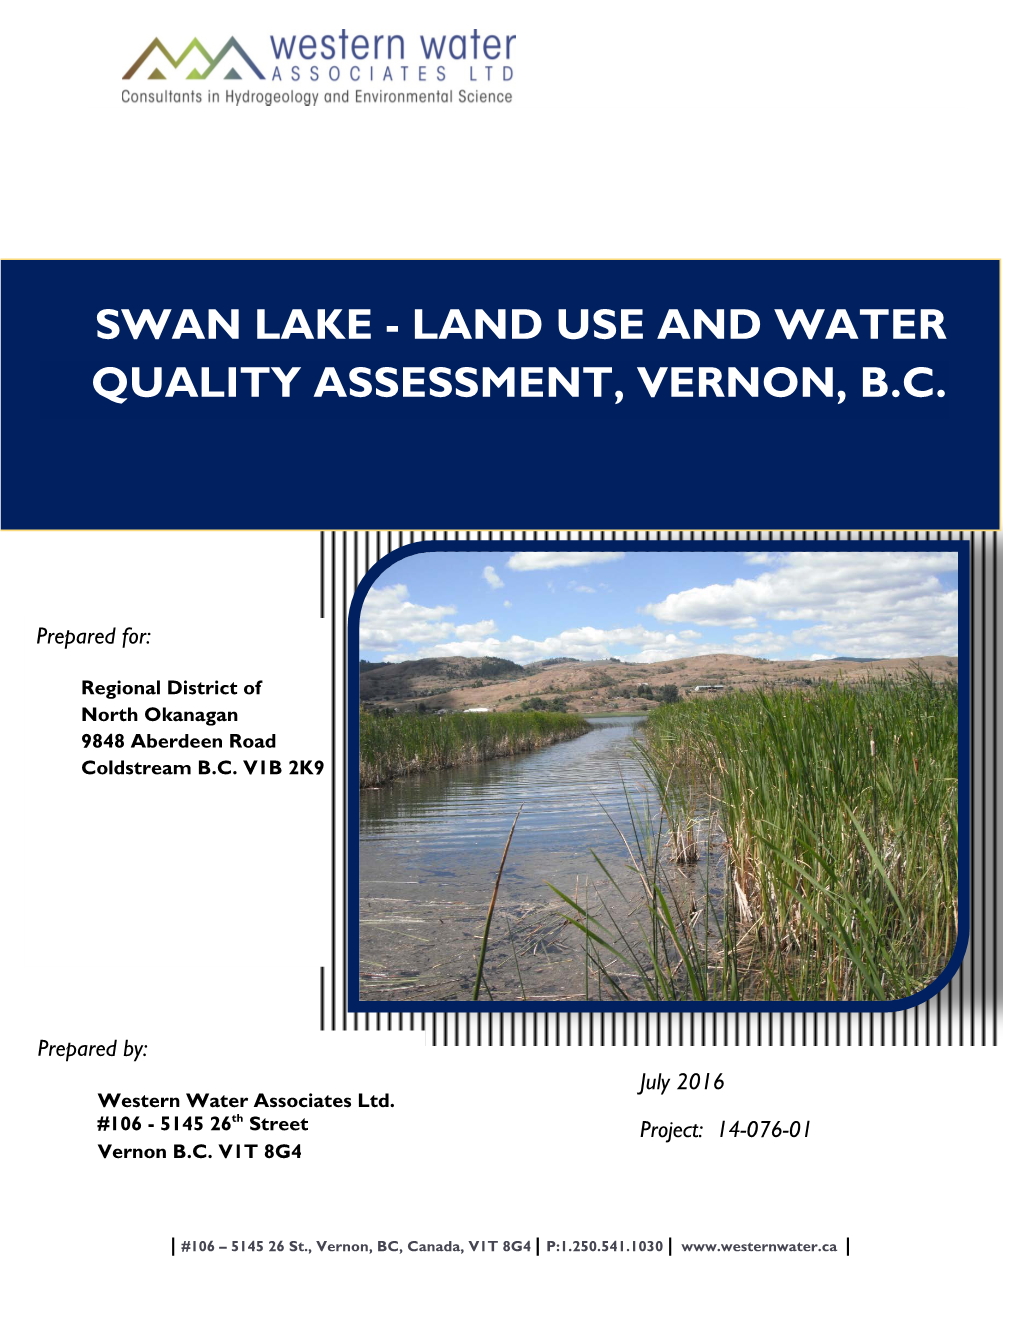 Preliminary Land Use and Water Quality Assessment of Swan Lake, North of Vernon, B.C